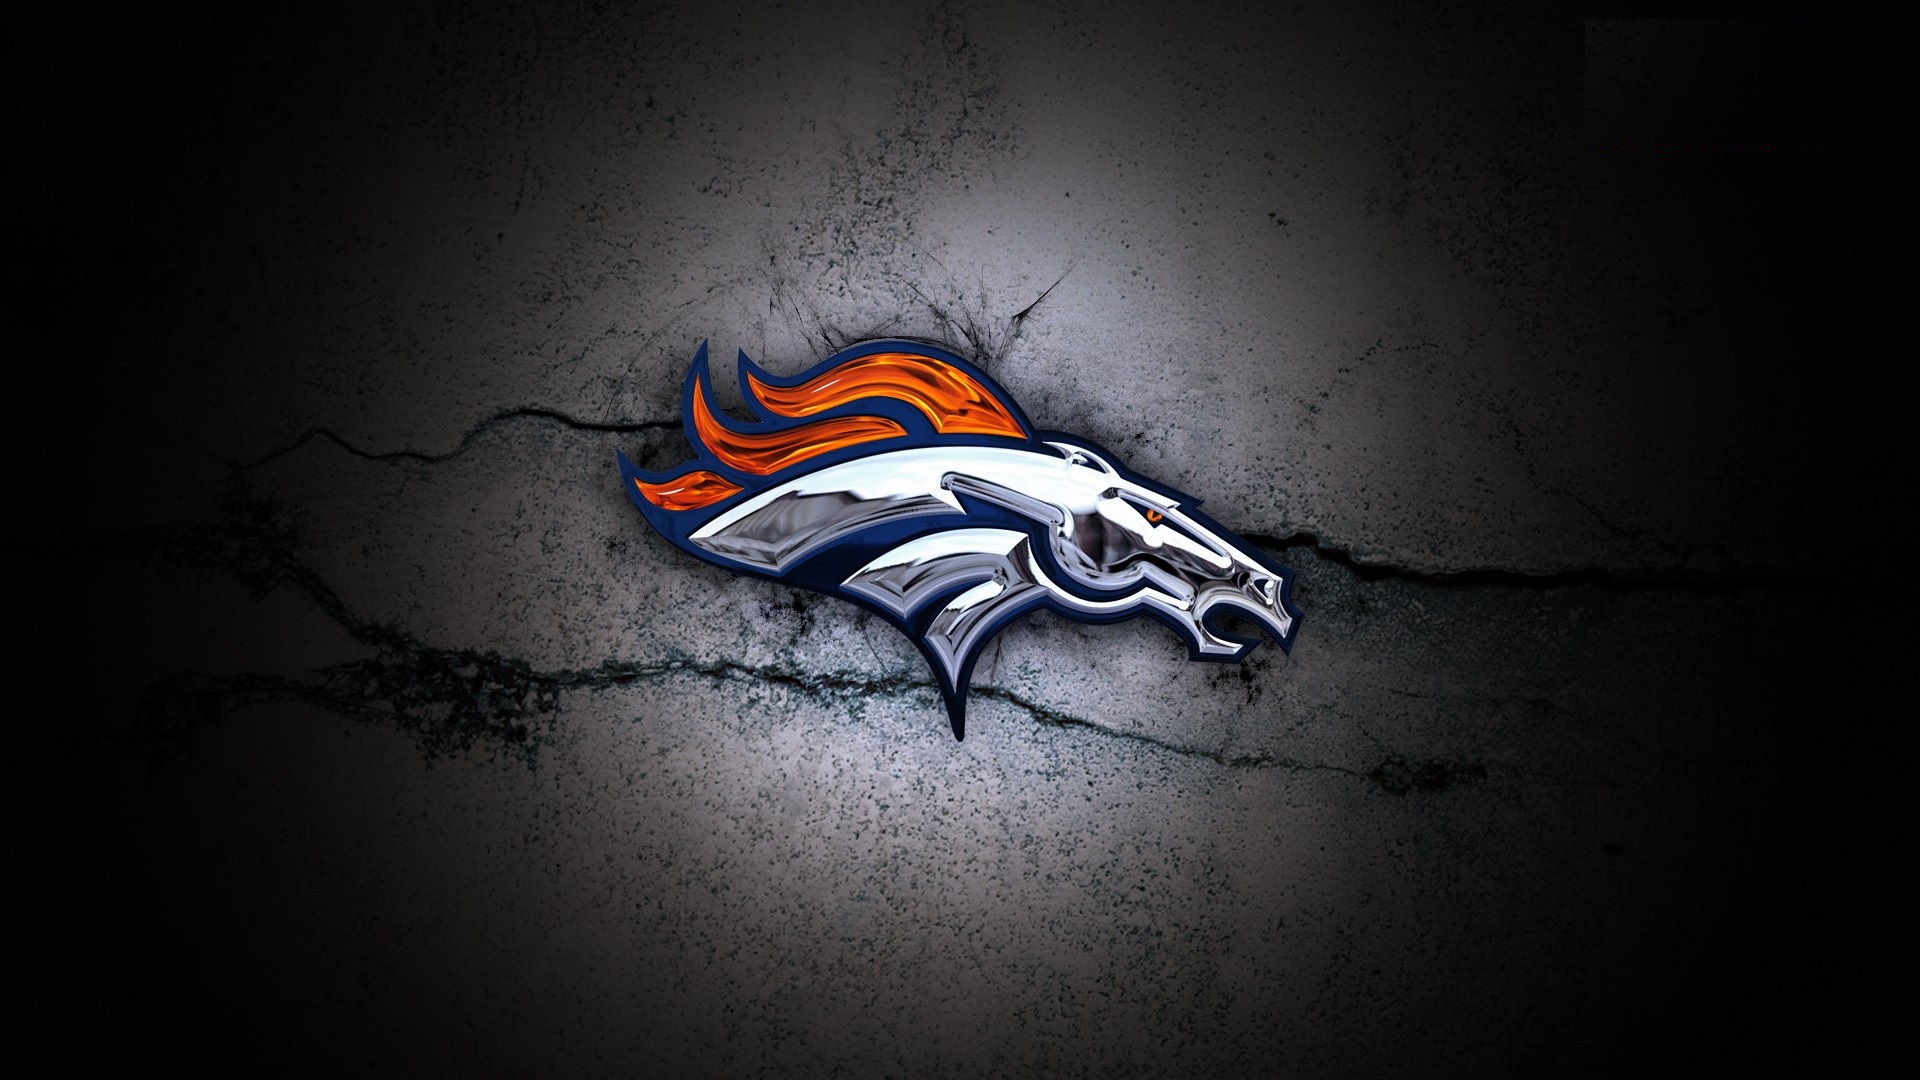 Denver Broncos NFL Desktop Wallpapers With high-resolution 1920X1080 pixel. You can use this wallpaper for your Mac or Windows Desktop Background, iPhone, Android or Tablet and another Smartphone device